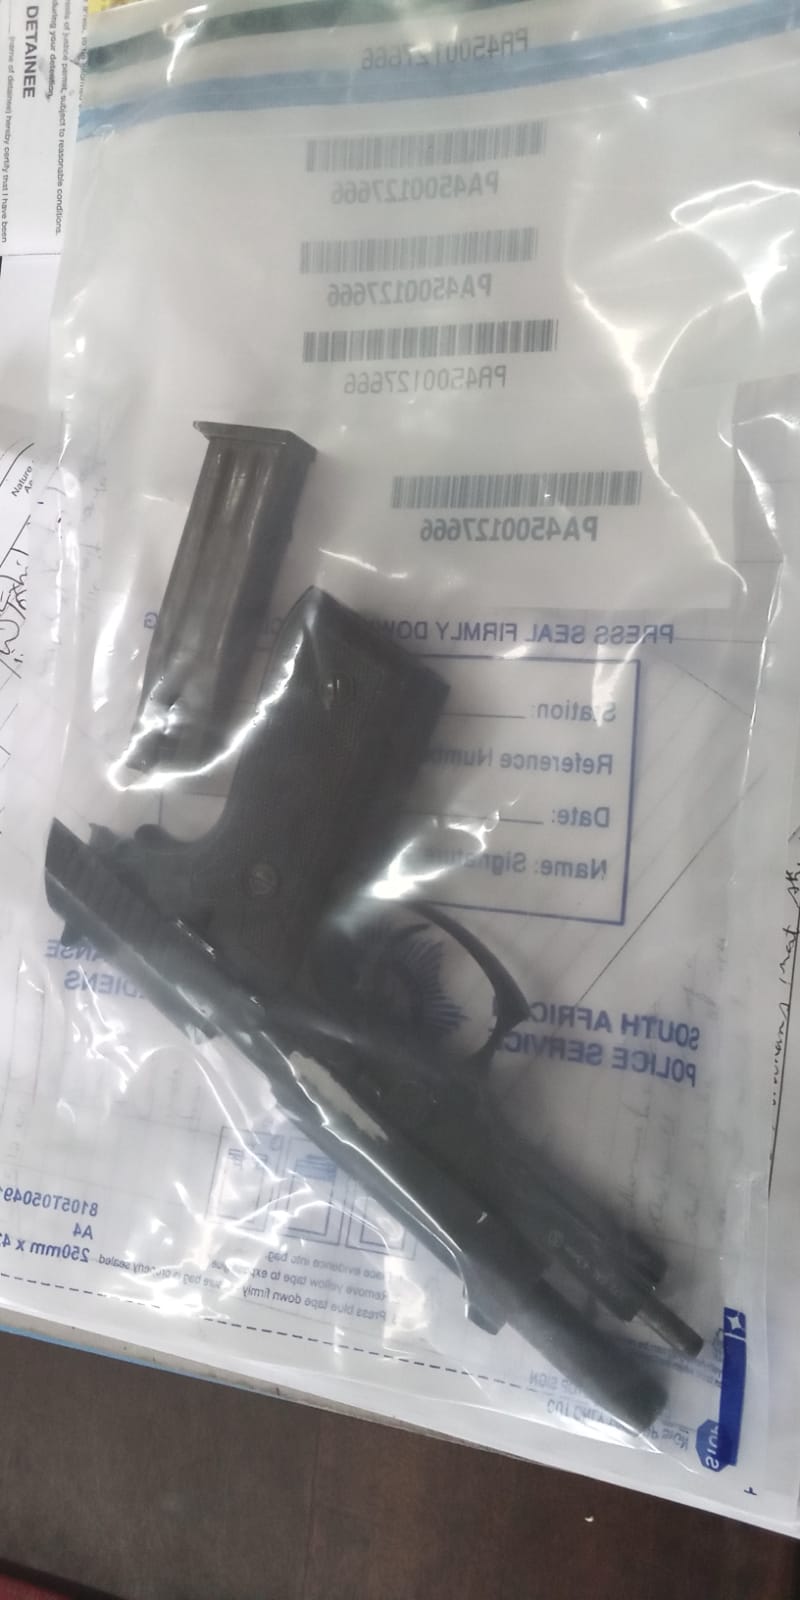 Suspects arrested for possession of unlicensed firearm